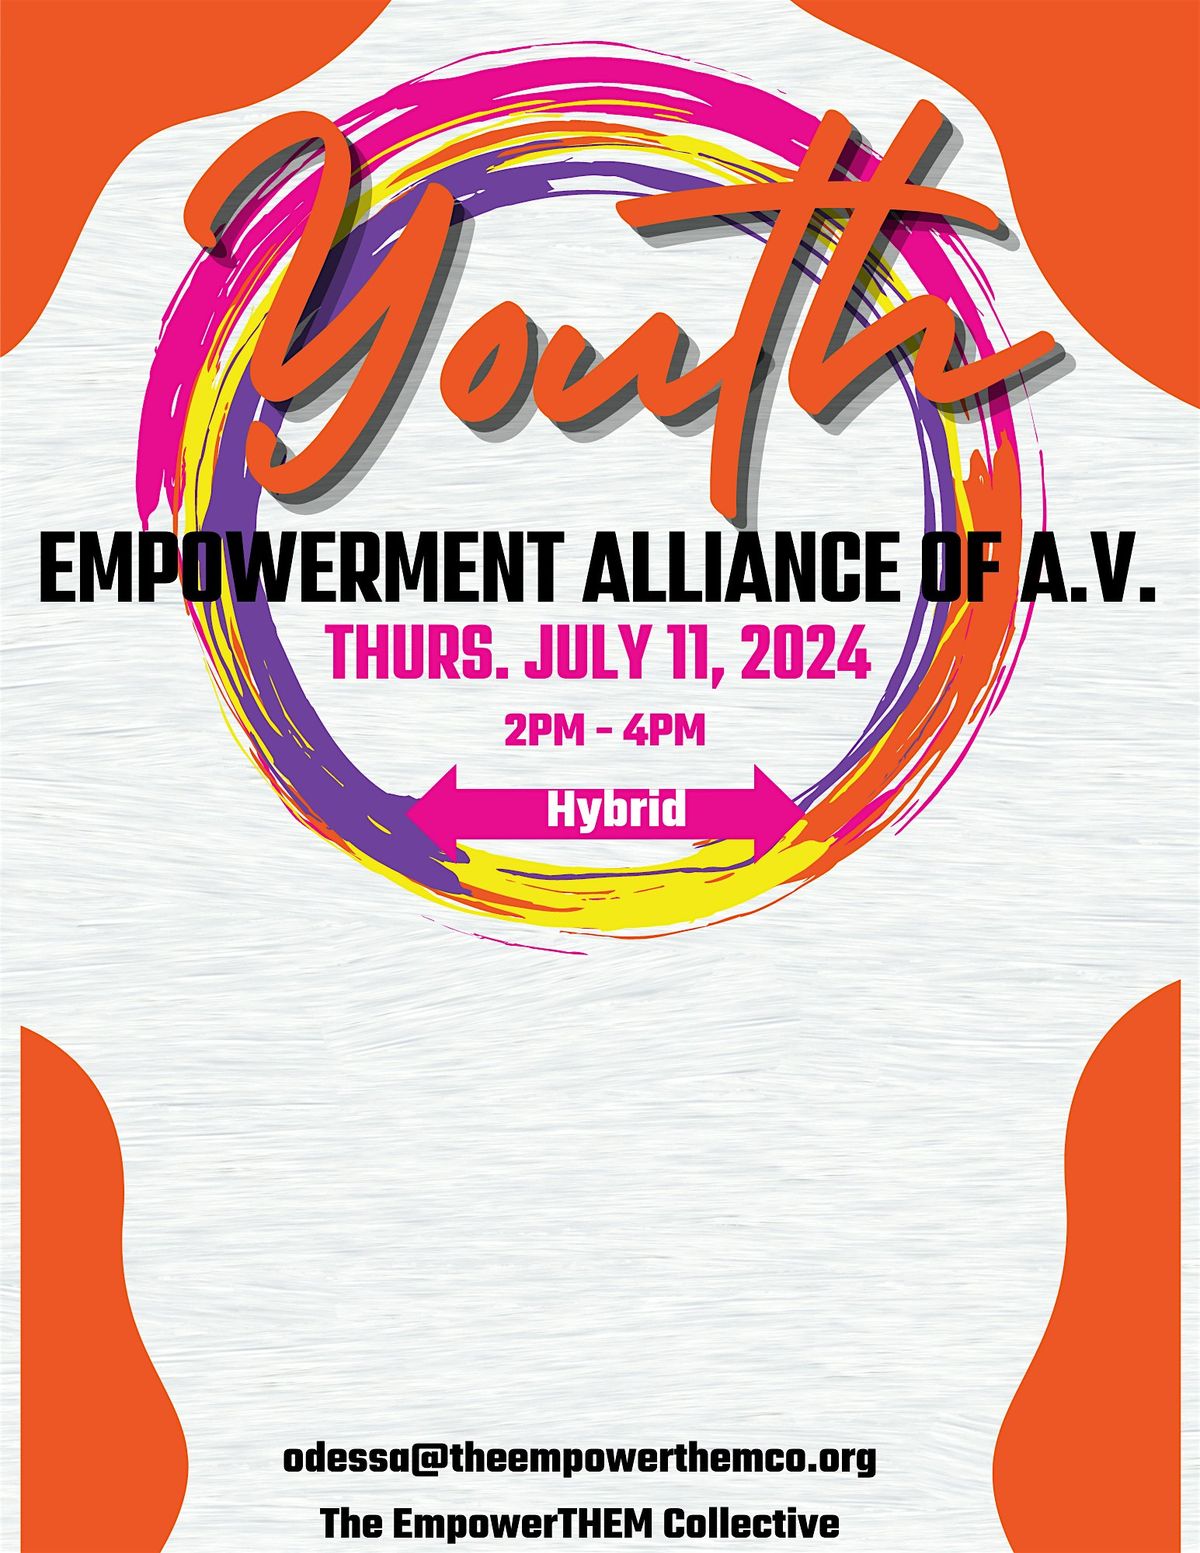 Youth Empowerment Alliance of the Antelope Valley